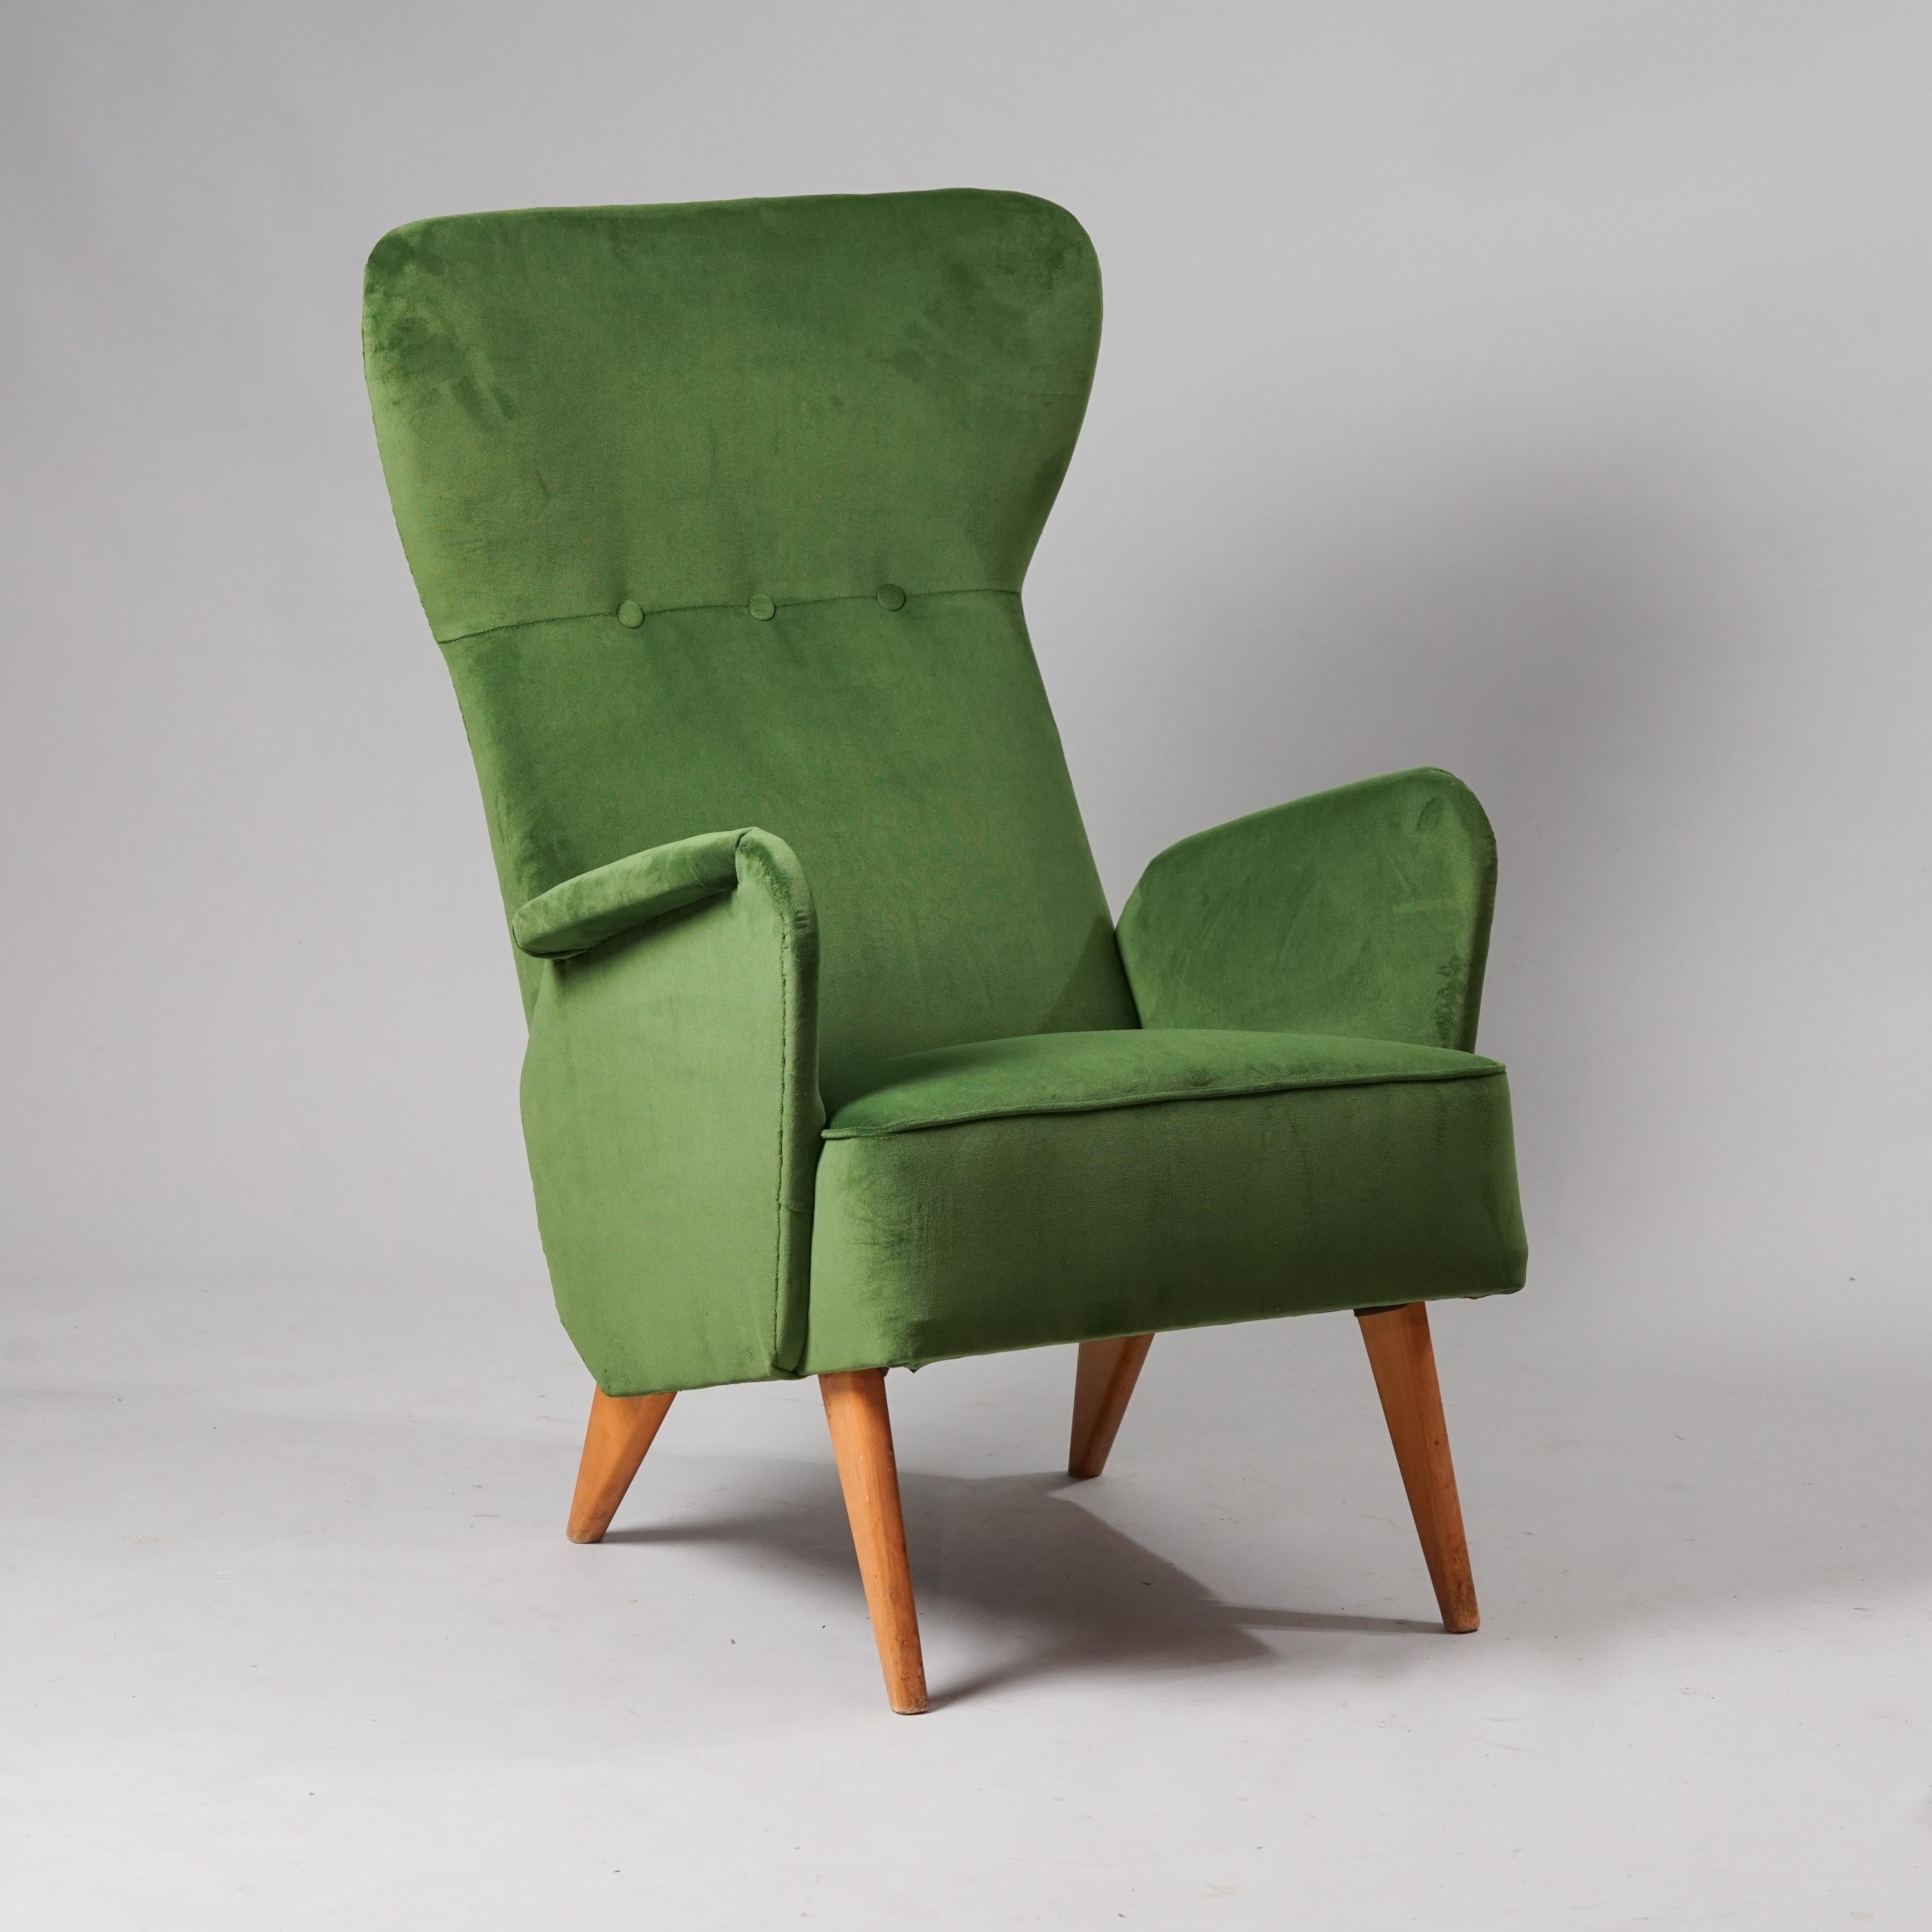 Lounge chair by Carl Gustaf Hiort af Ornäs, manufactured by Hiort tuote, from the 1950/1960s. Birch frame, reupholstered with quality fabric. Good vintage condition, minor patina consistent with age and use. Classic style of lounge chair by Hiort af